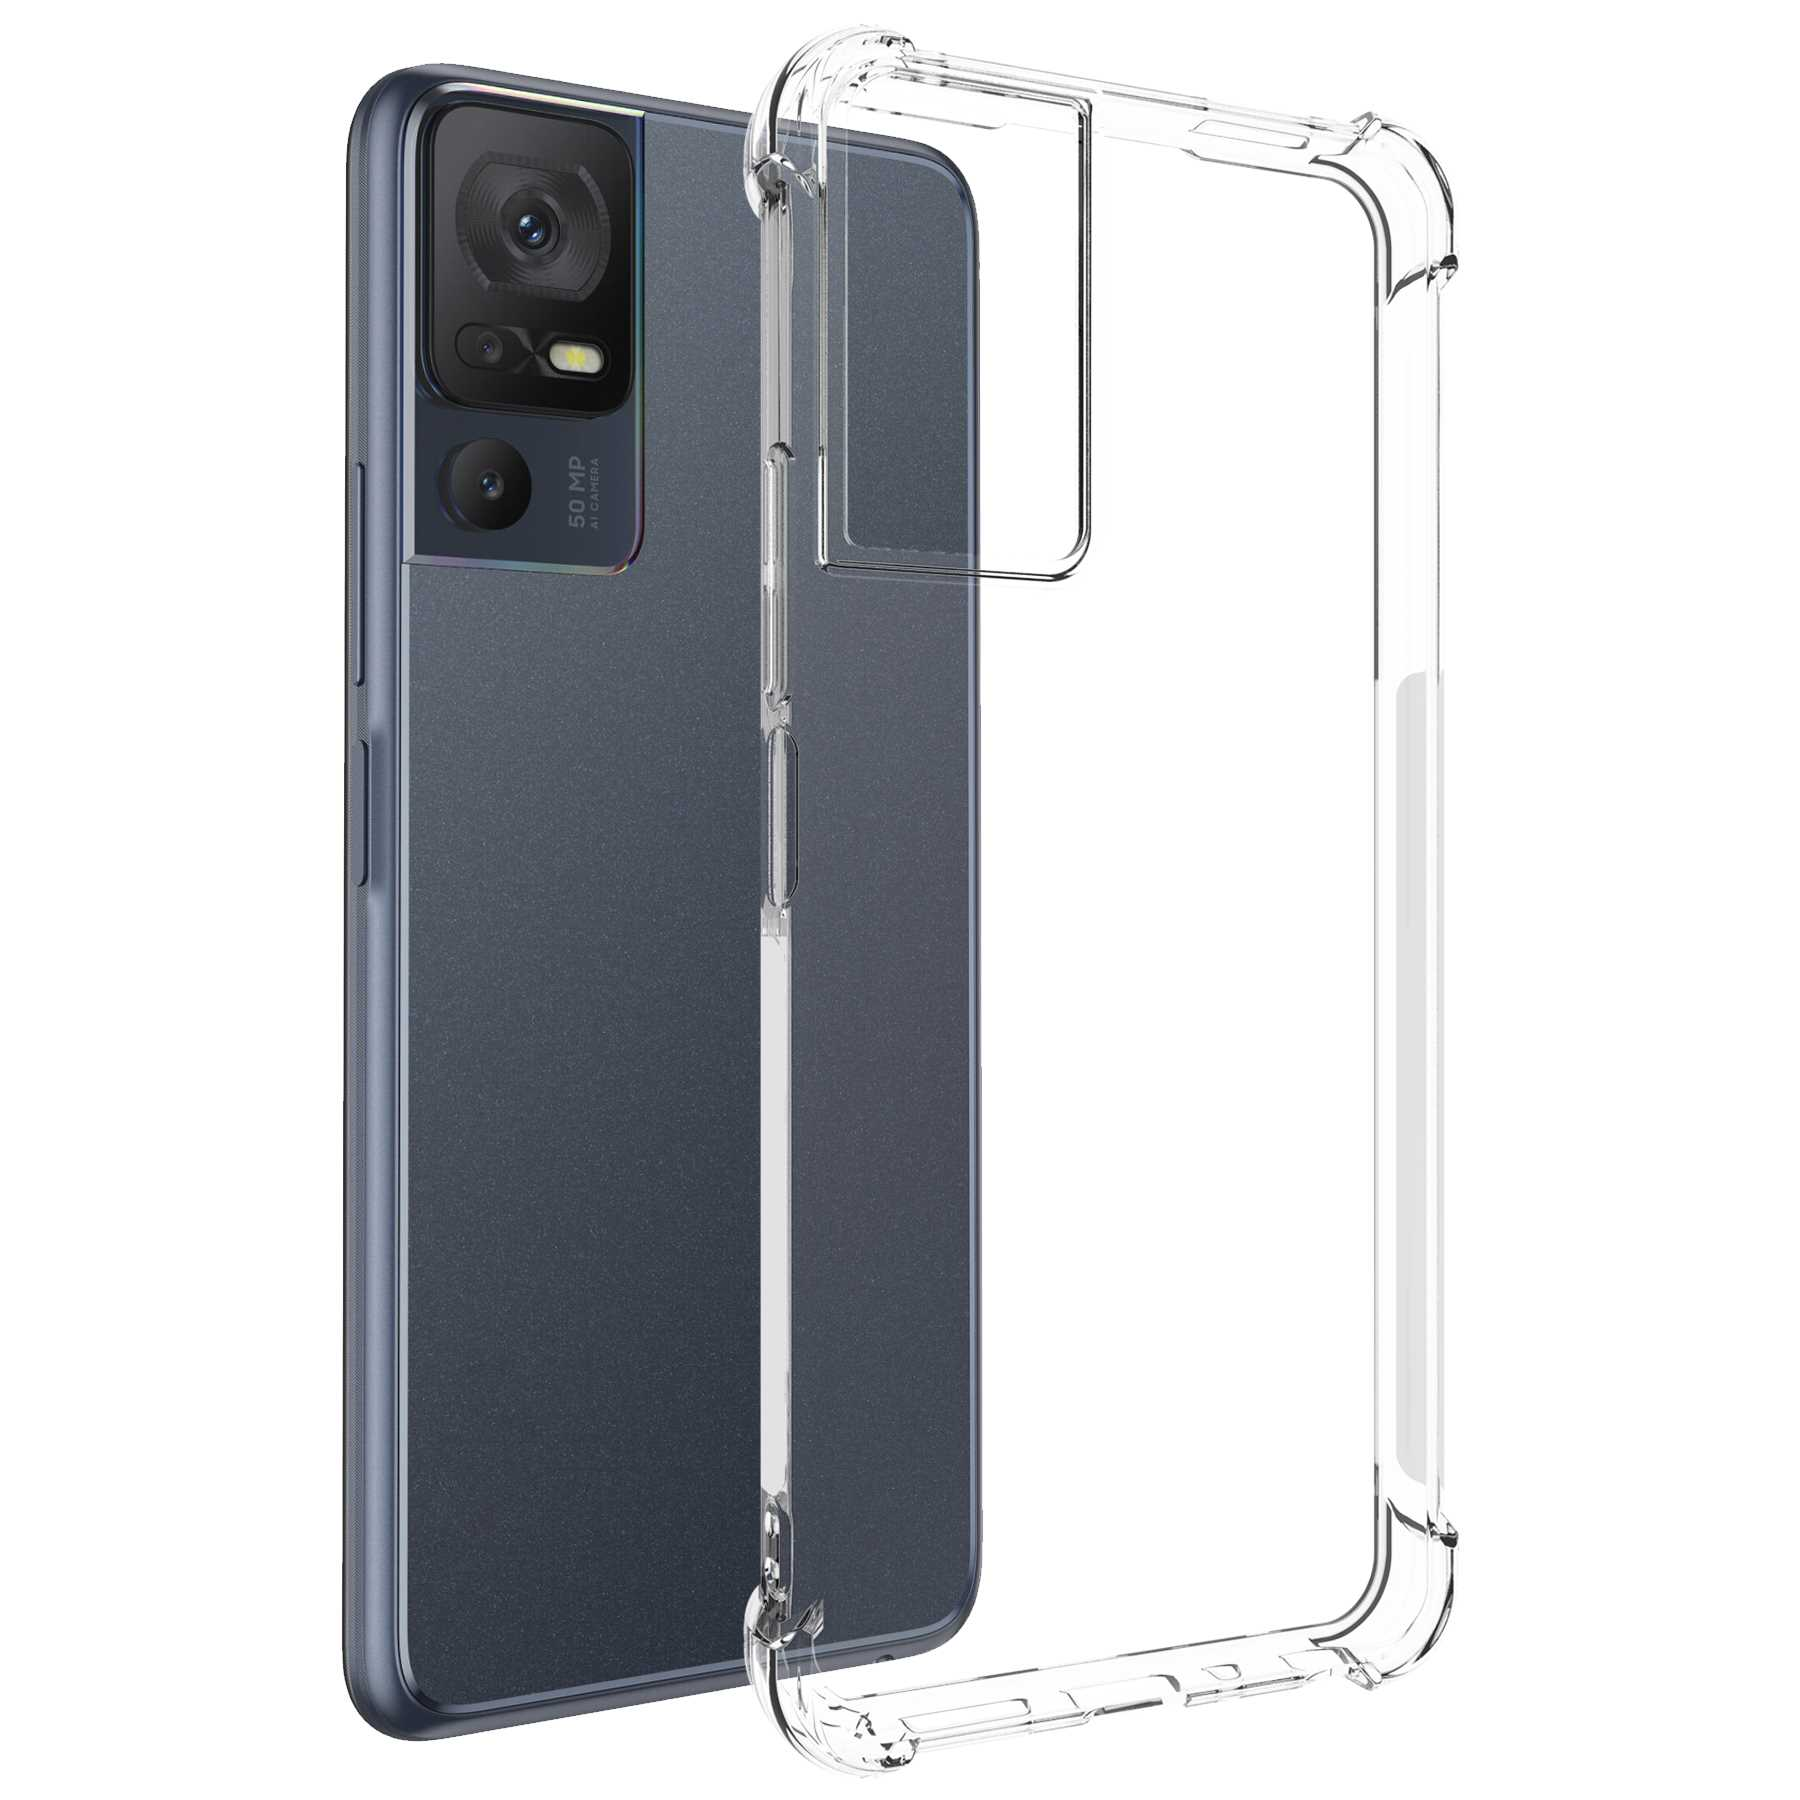 Backcover, Clear TCL, ENERGY Transparent Armor MTB MORE Case, SE, 40